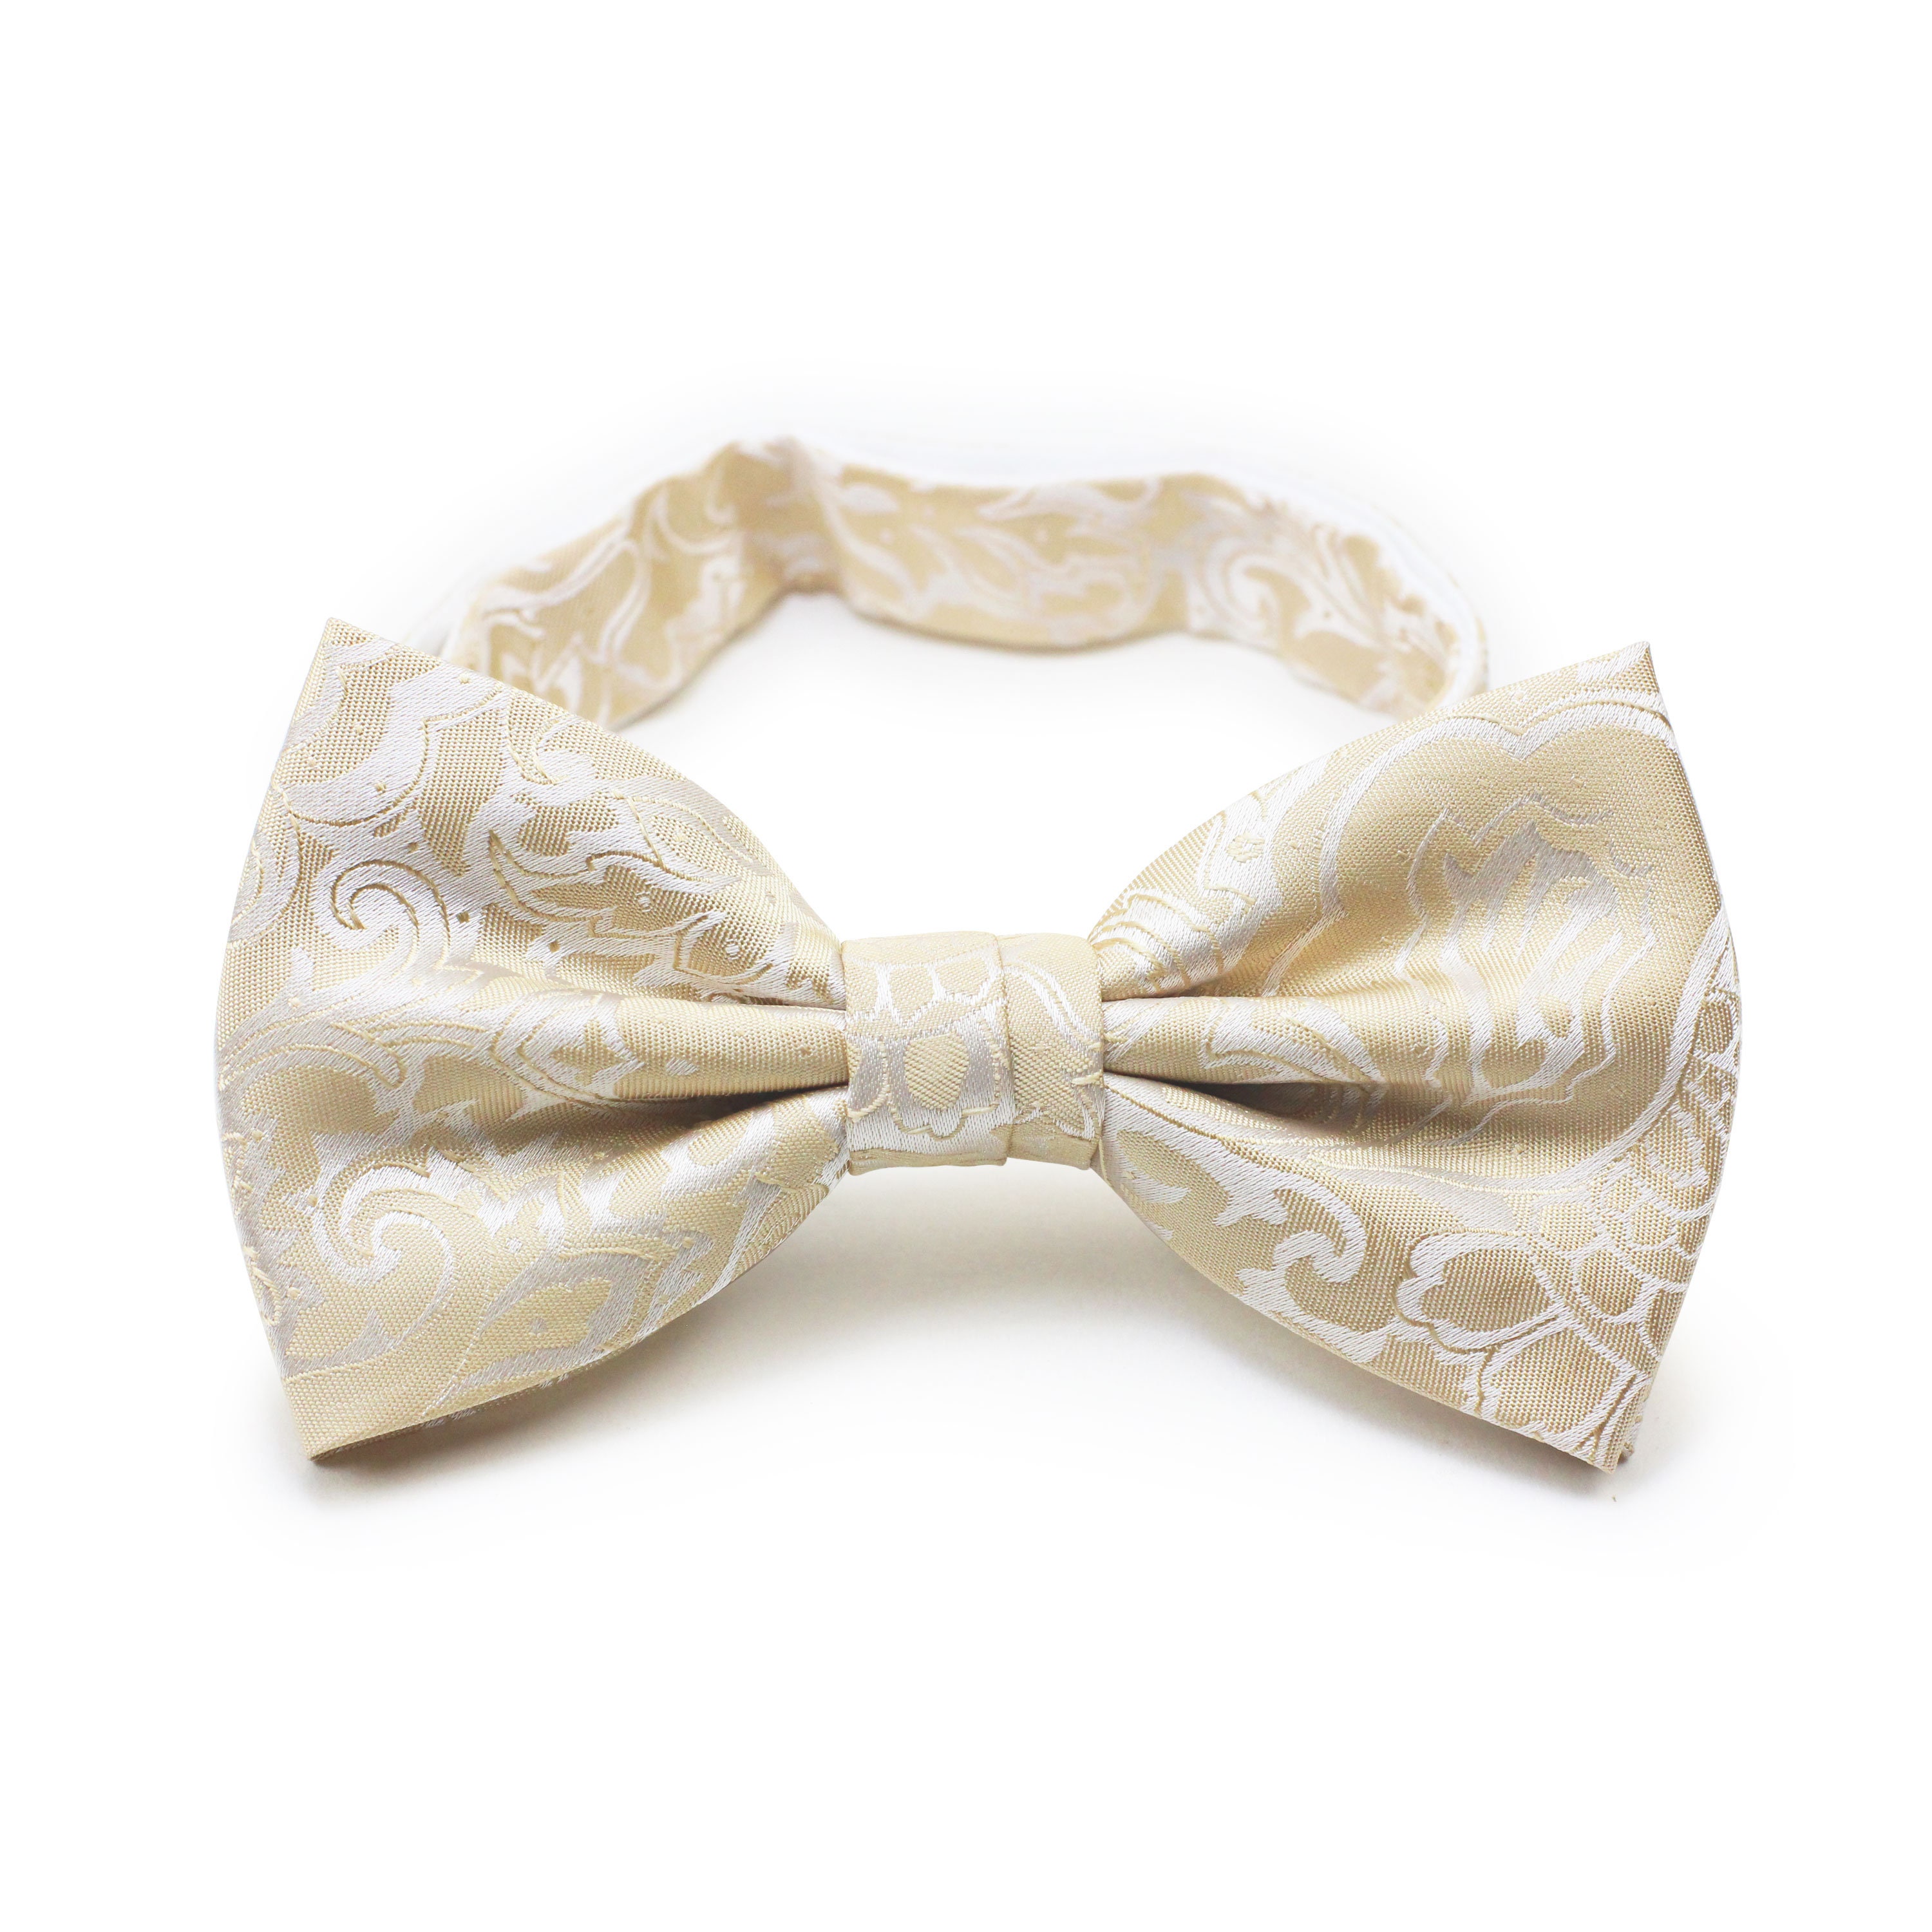 Details about    2 Bow Ties Cream White Silver Black Paisley Bow Tie New w Tags Croft Barrow